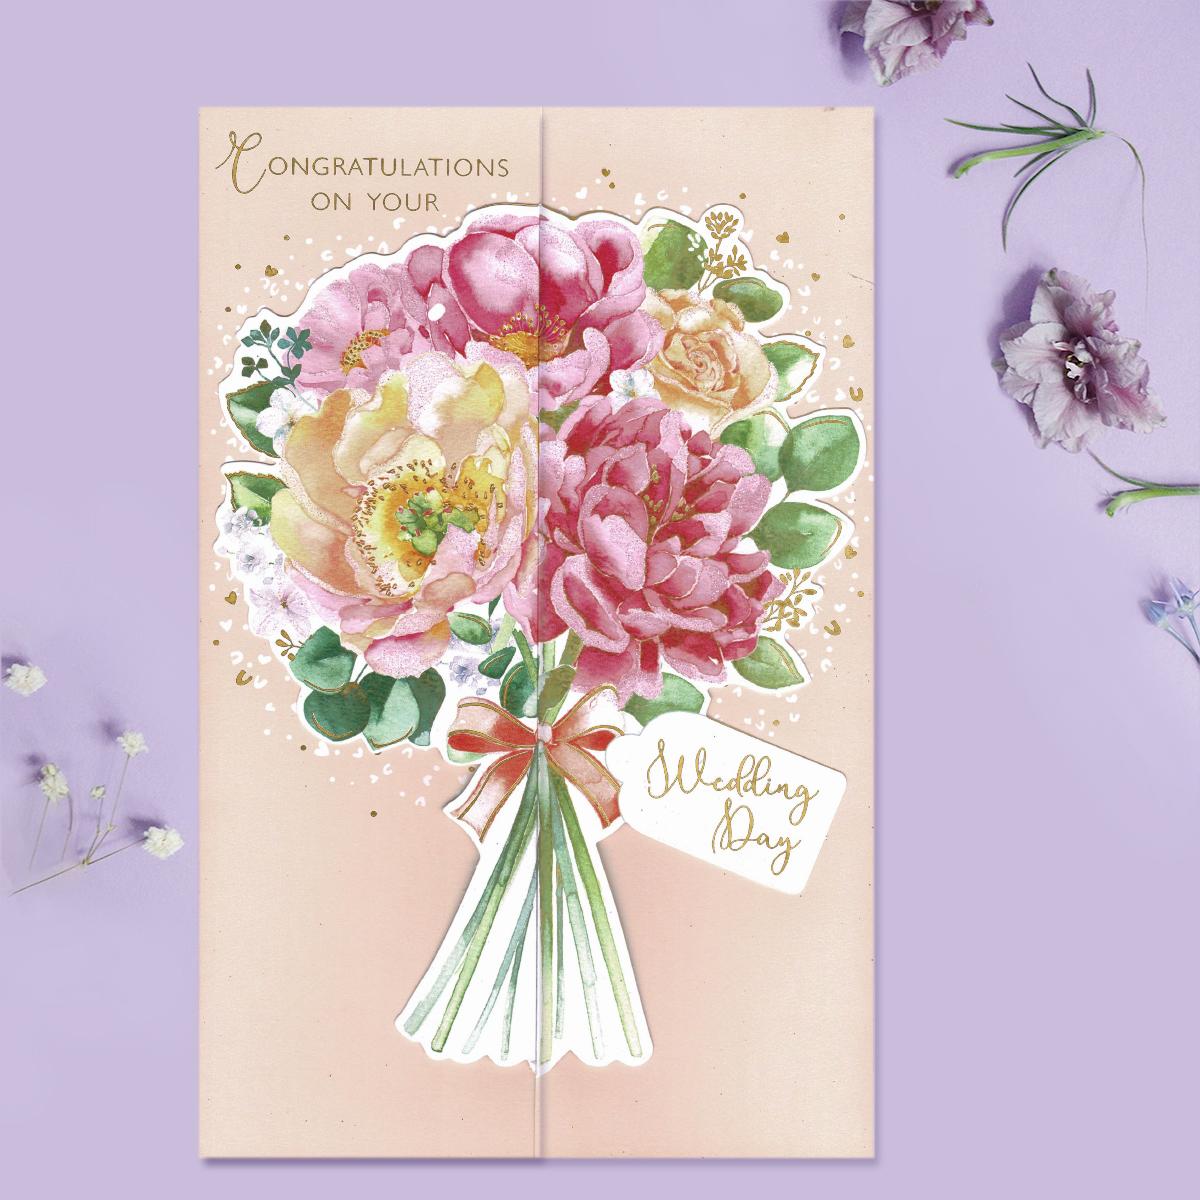 Congratulations On Your Wedding Day Card Front Image